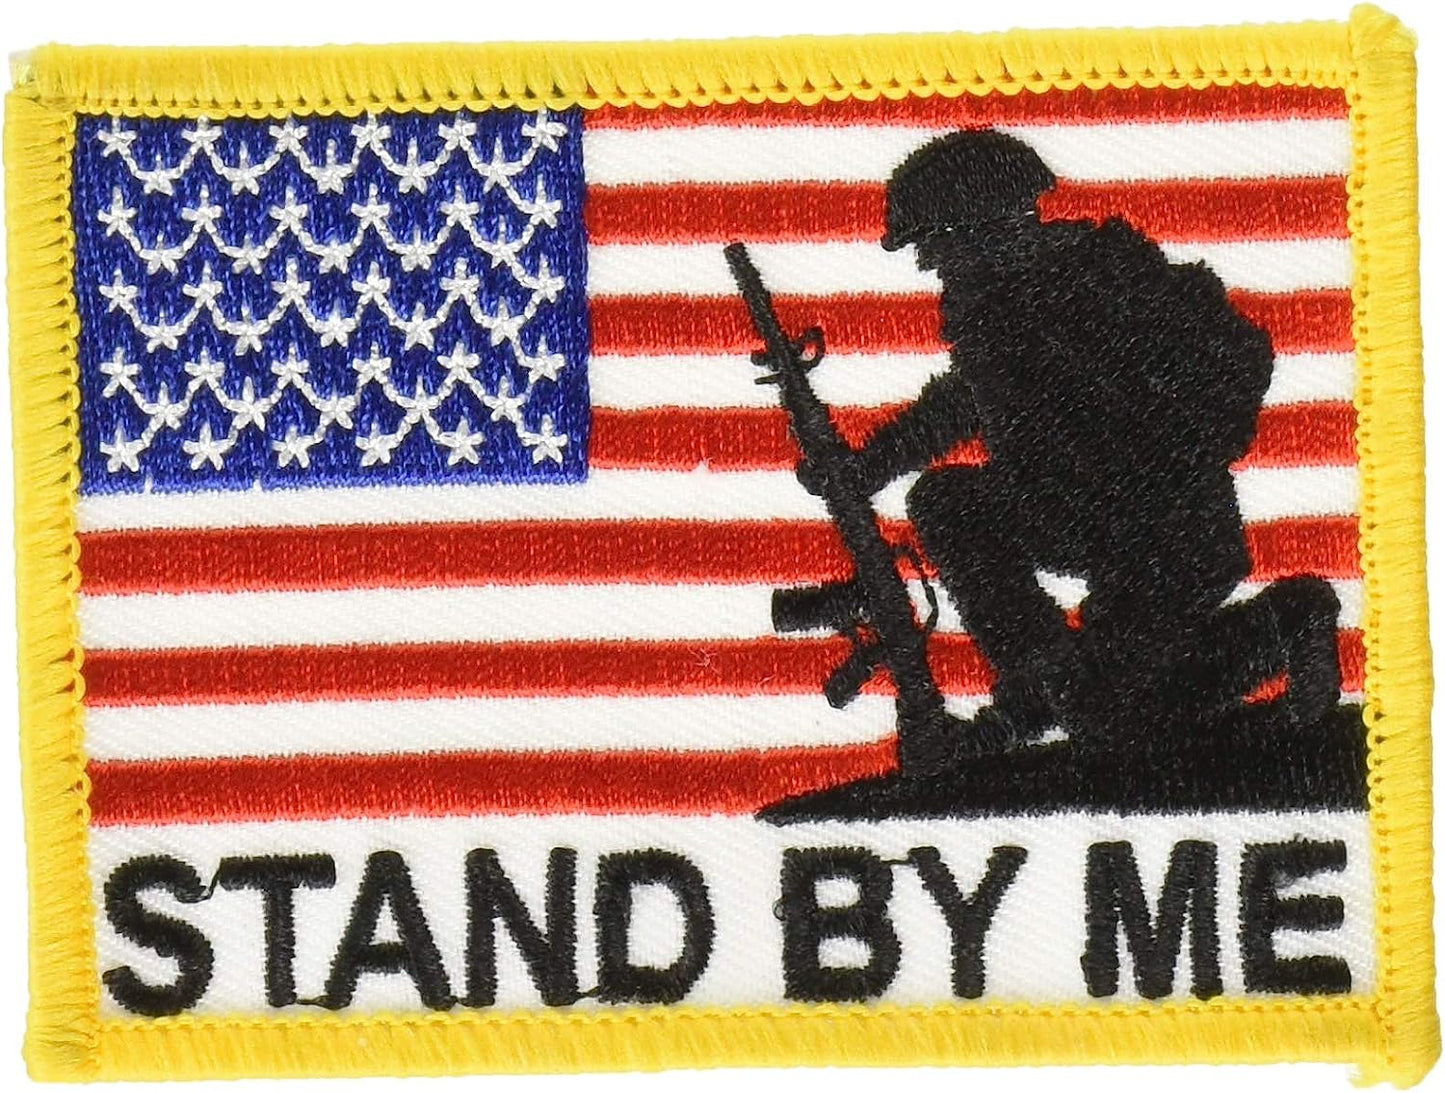 USA Stand By Me Patch - 3-3/8"